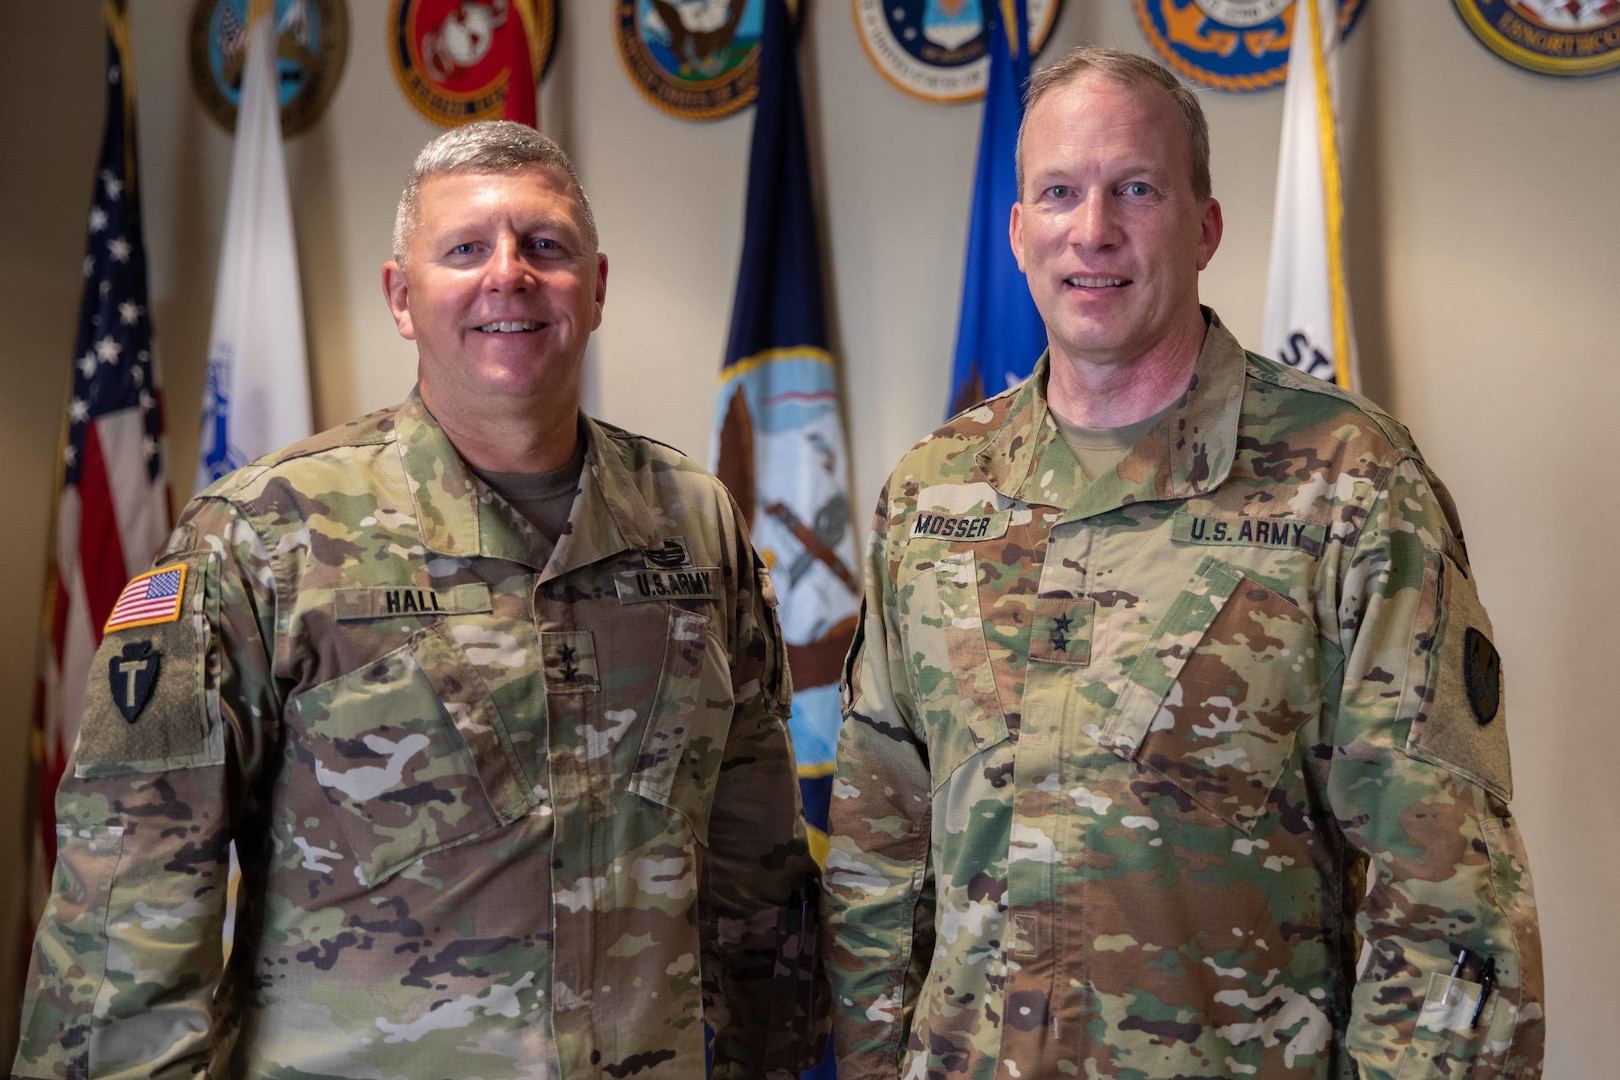 Army Maj. Gen. Greg Mosser, commanding general of the 377th Theater Sustainment Command, poses with Joint Task Force Civil Support (JTF-CS) Commanding General Army Maj. Gen. William “Bill” Hall during a recent visit to JTF-CS’s headquarters.